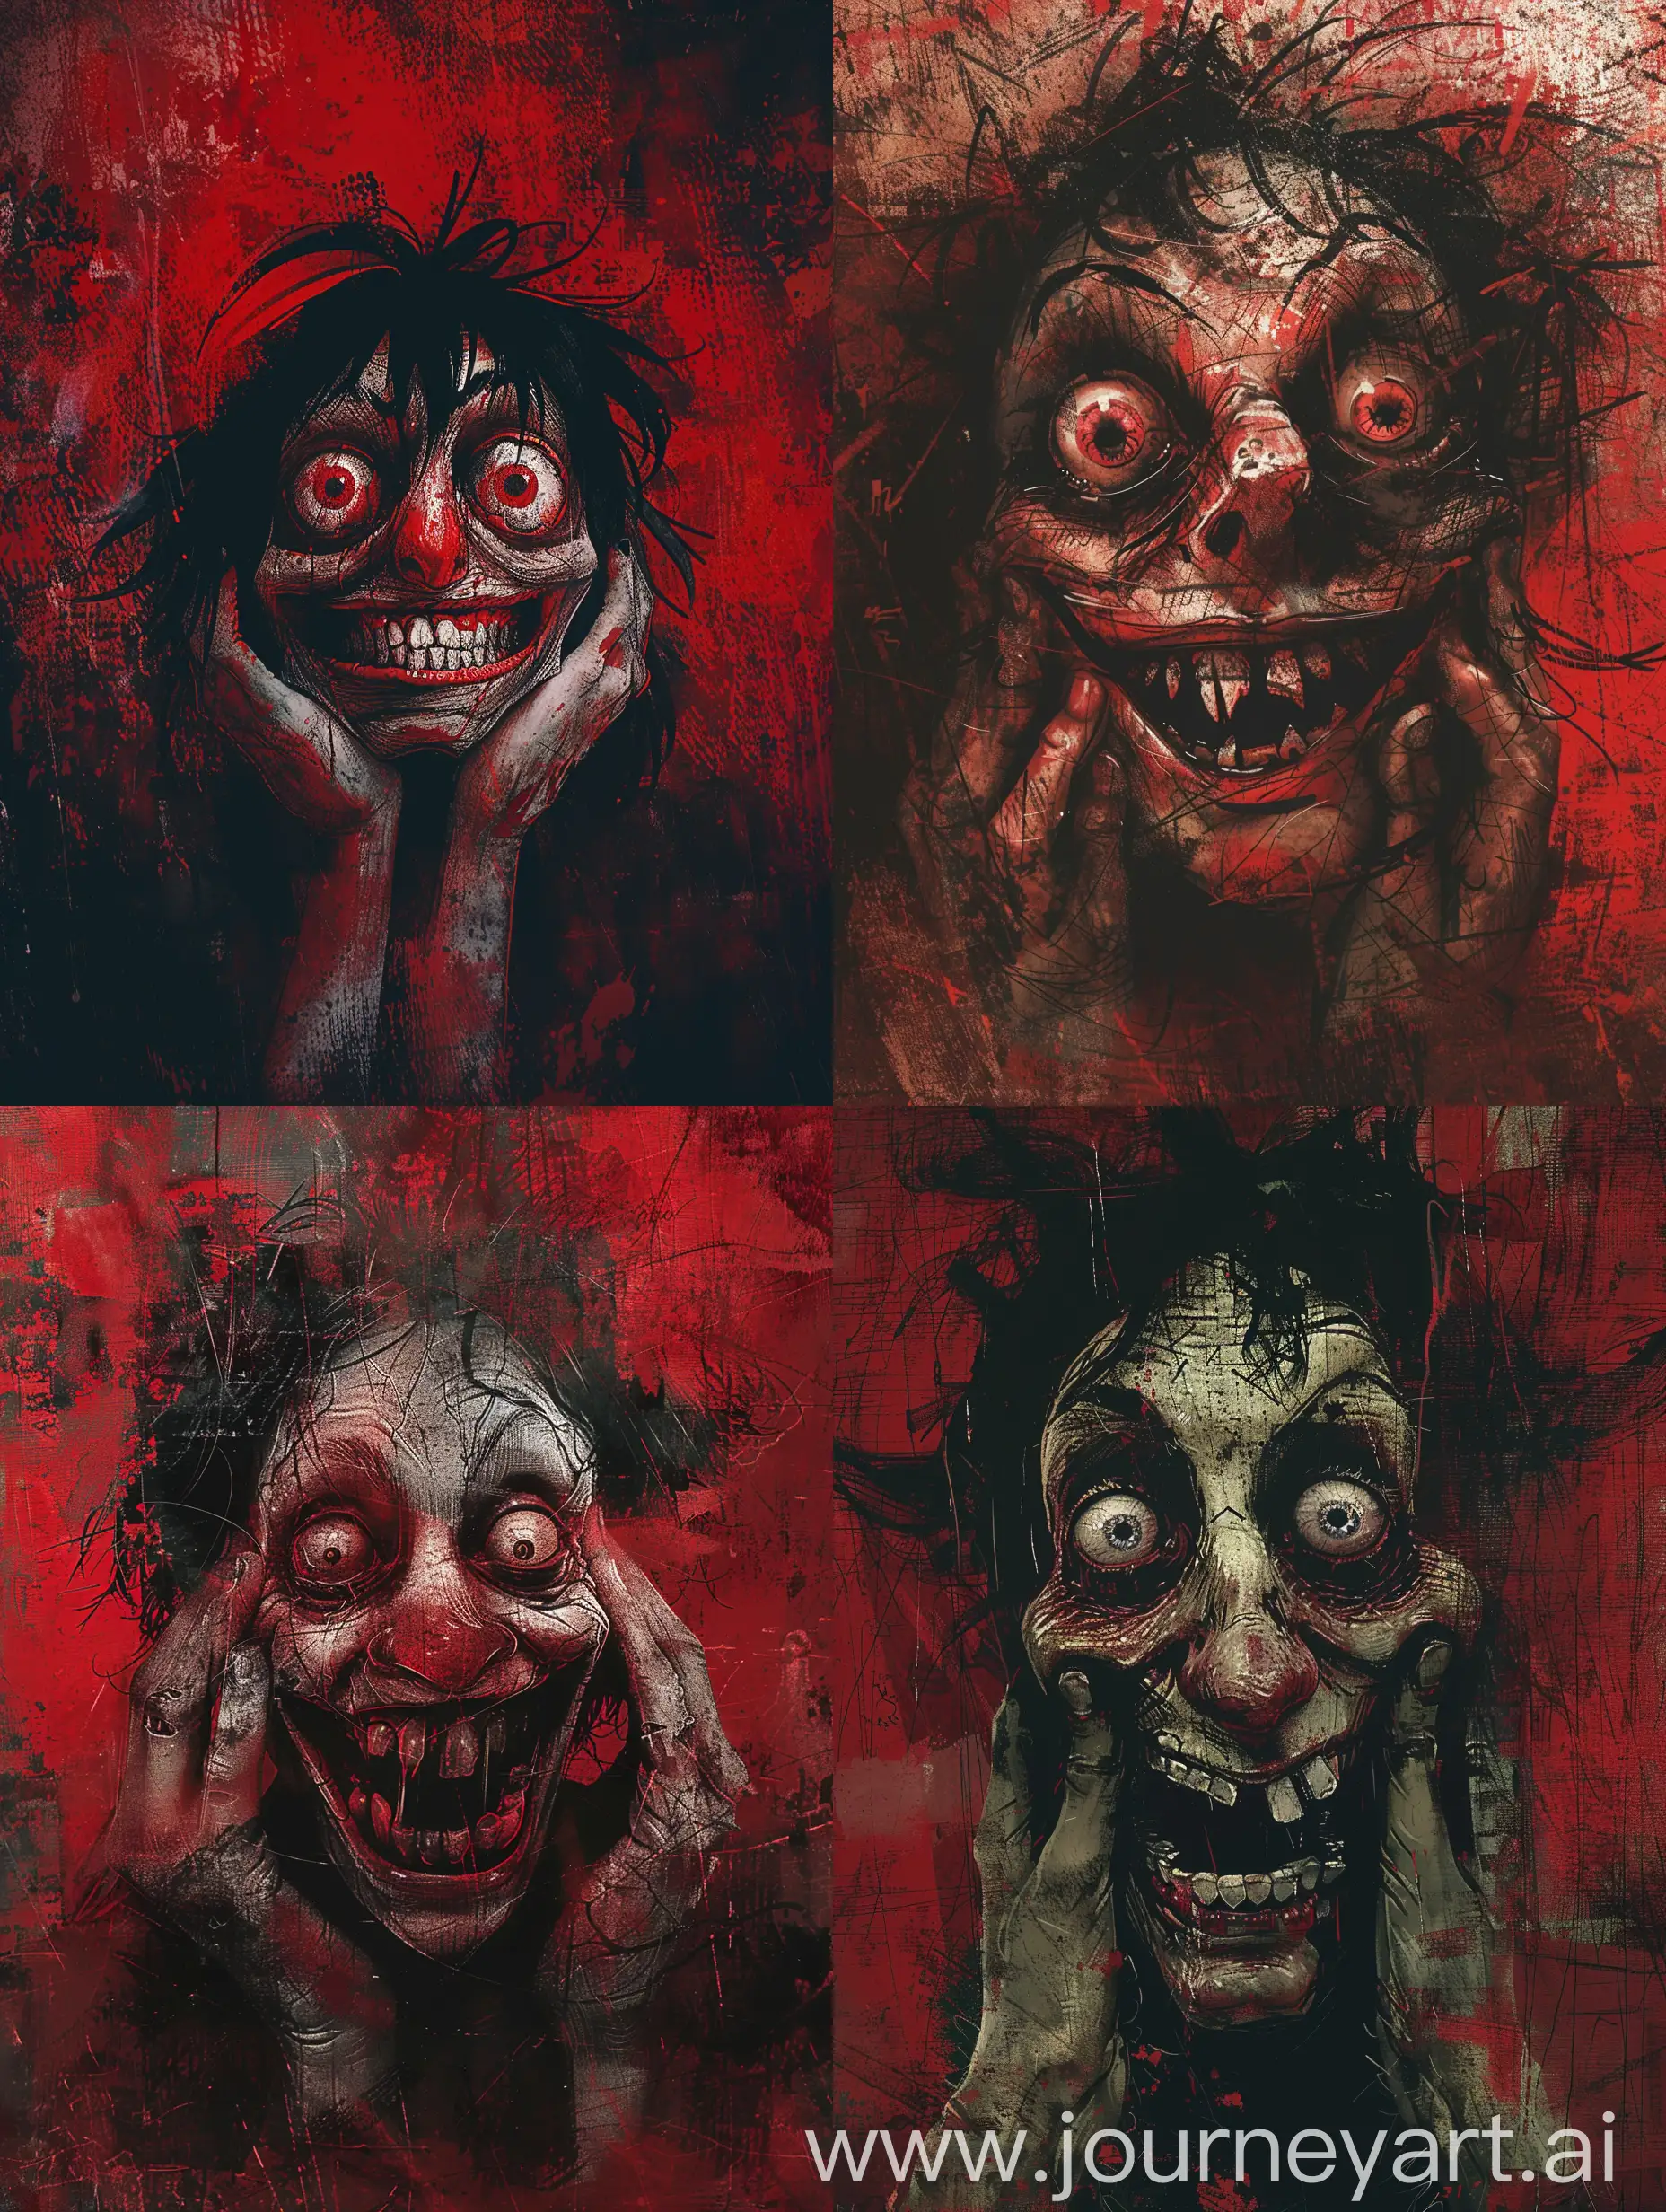 digital illustration, dark gritty art style, horror, psychological themes, close-up of a distorted face with large unsettling grin and wide staring eyes, face framed by hands pressing against cheeks, predominantly red rough textured background, muted tones with red accents, macabre atmosphere, dark messy hair blending into shadowy background, intense and eerie mood, expressive and exaggerated features, high contrast, rough expressive lines